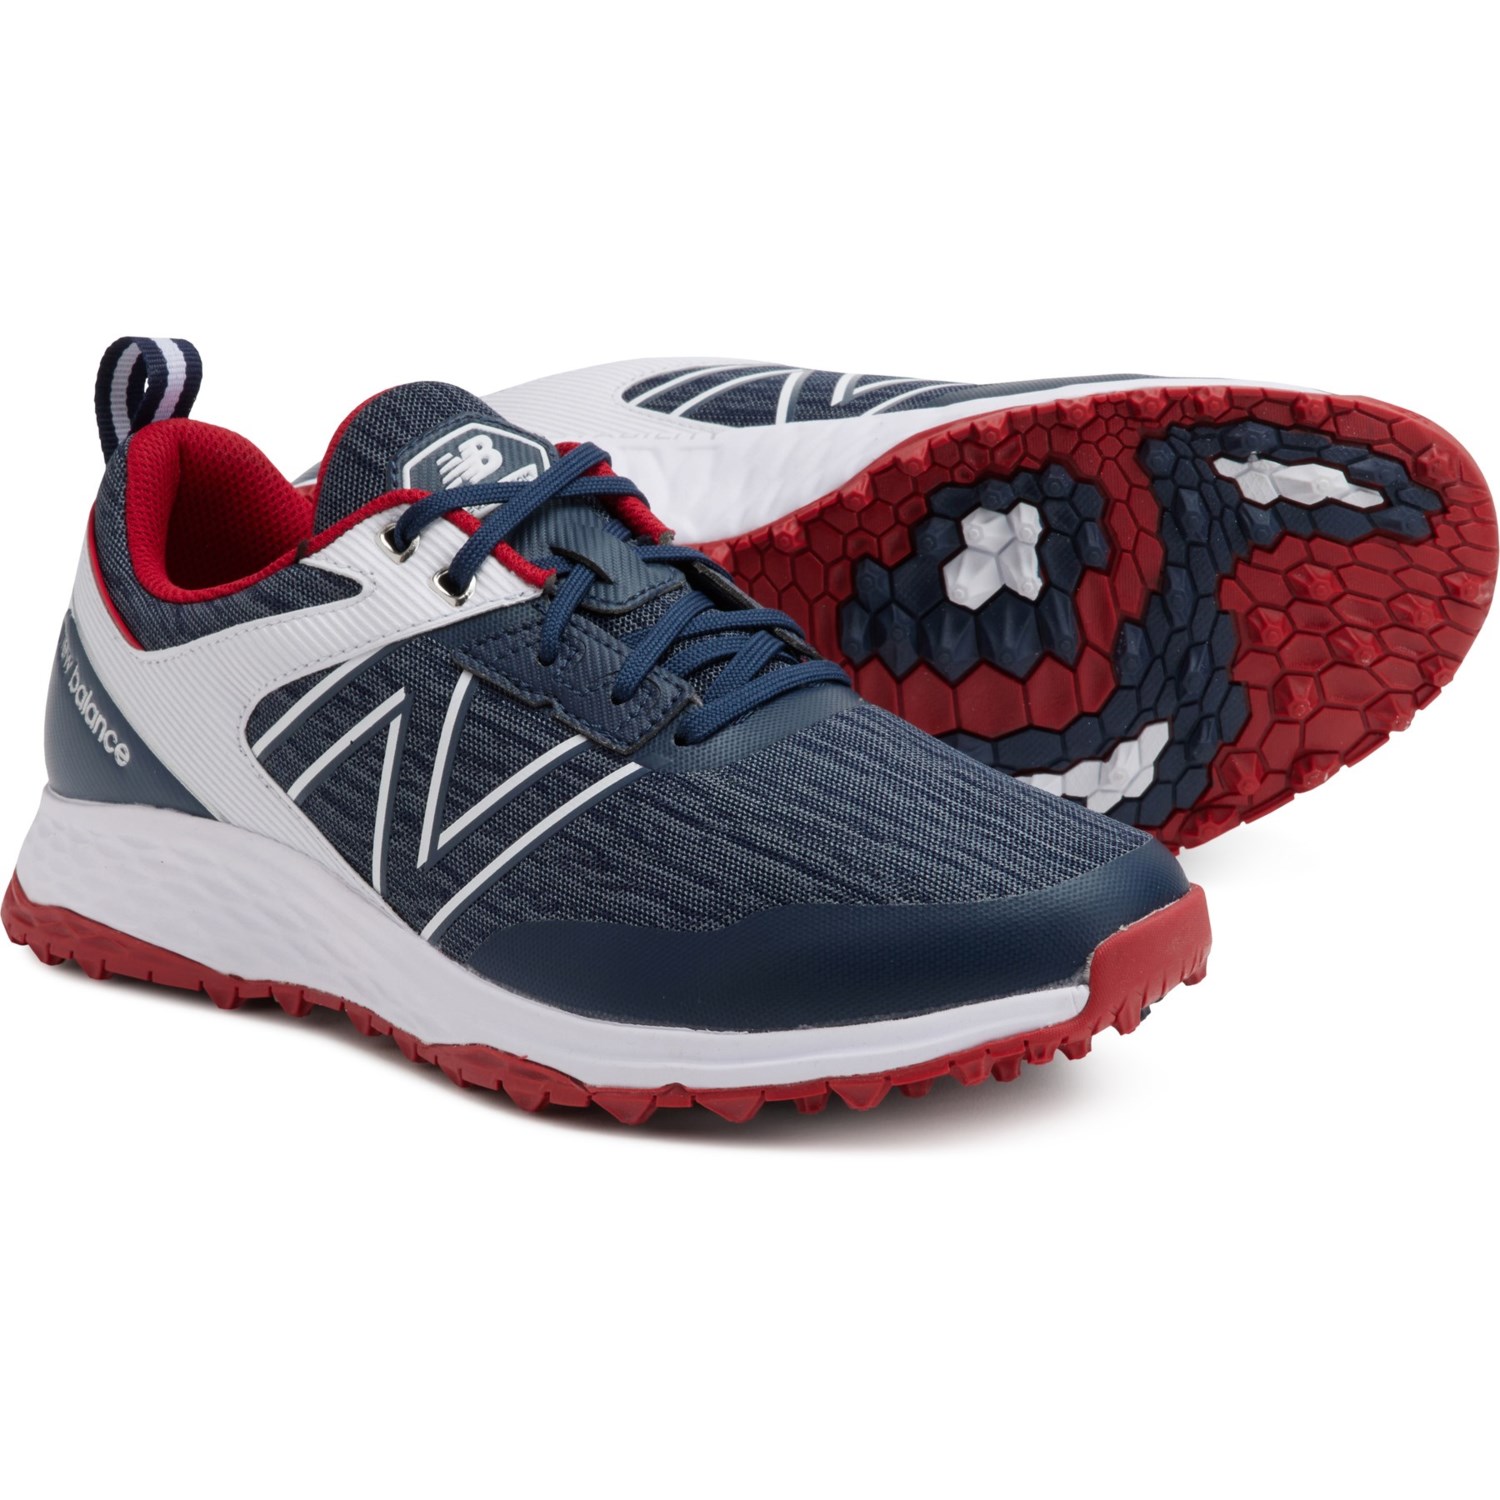 () ˥塼Х  եå ե ƥ  塼 New Balance men Fresh Foam Contend Golf Shoes (For Men) Navy/White/Red